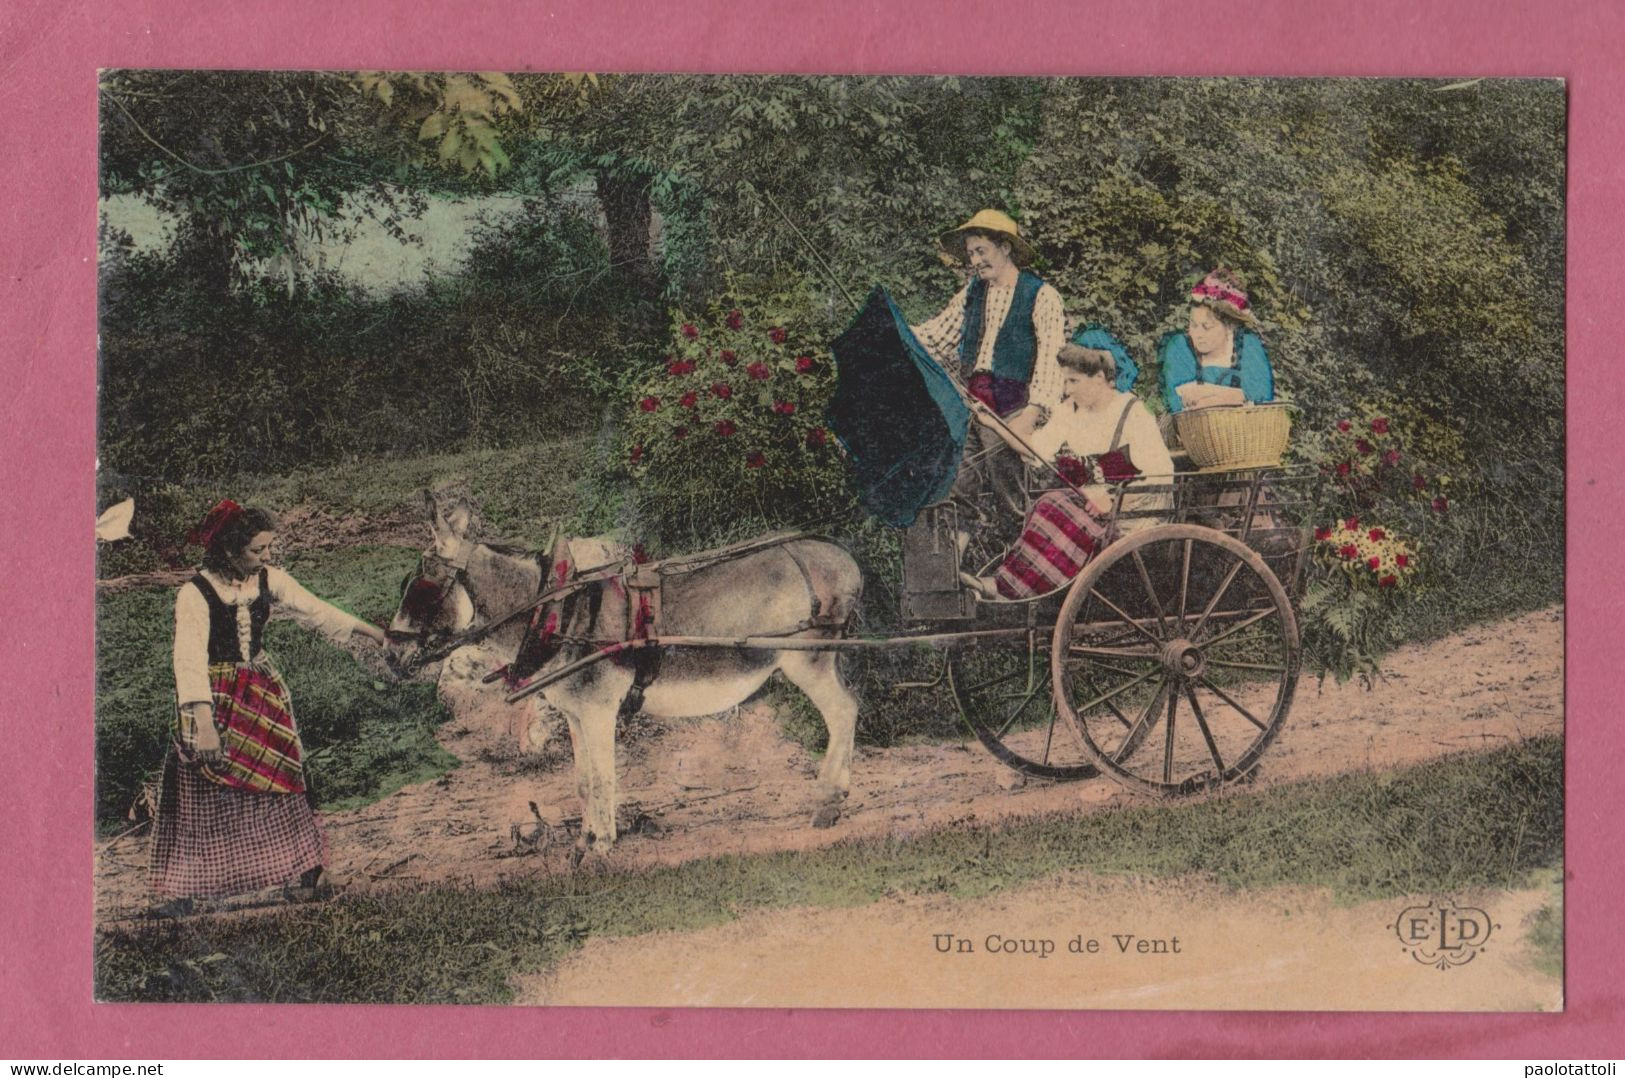 Transportation- Donkey Pull One Cart With People On It- Un Coup De Vent- Small Size, Divided Back, Ed. ELD, New - Donkeys